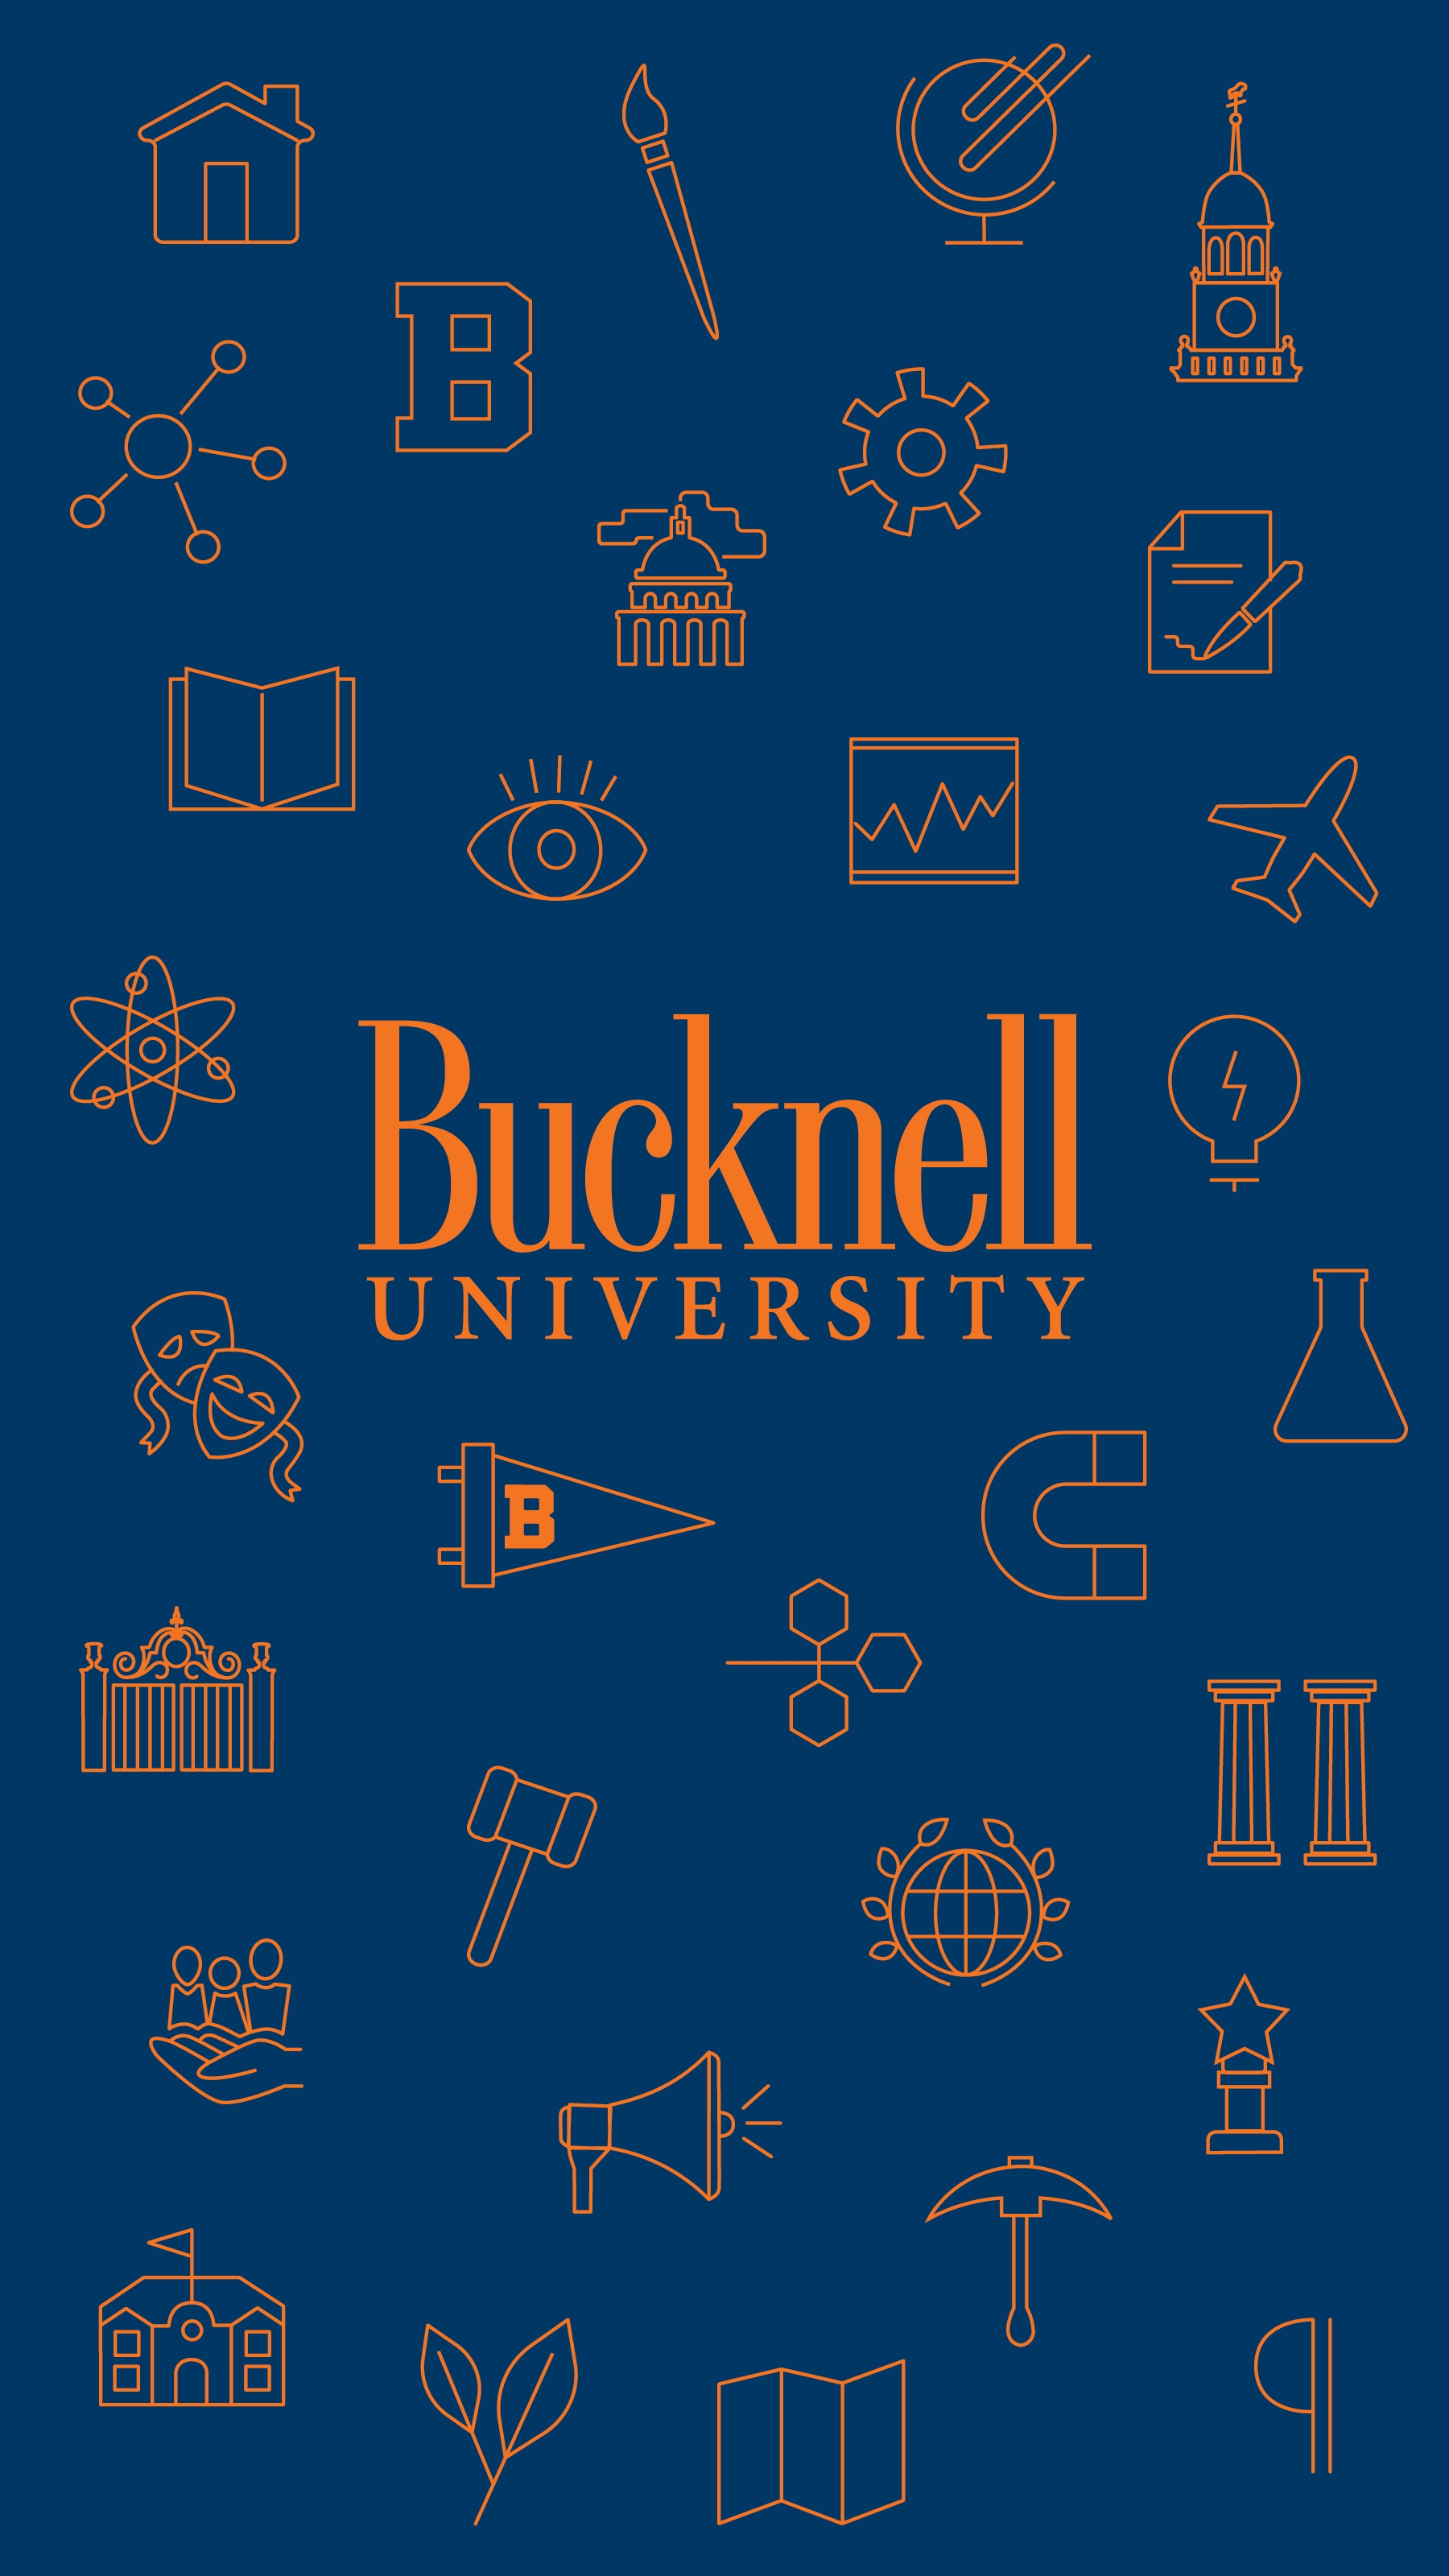 A collage of Bucknell's iconography